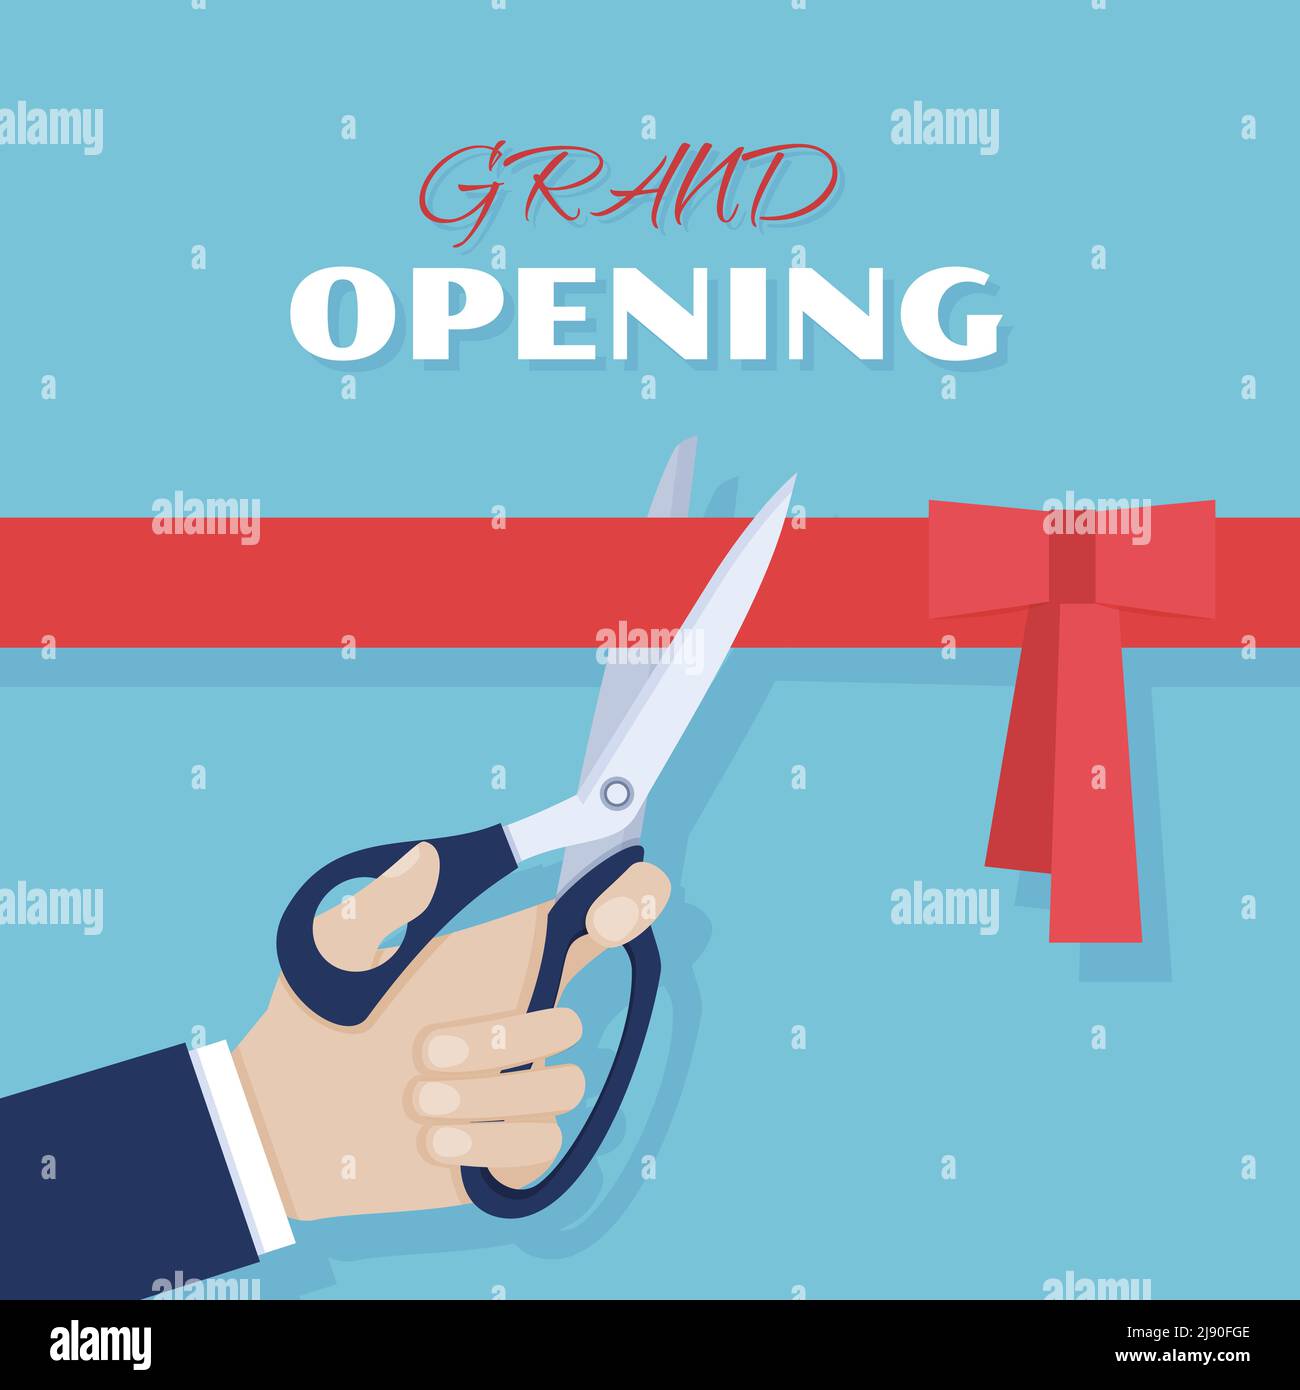 26 Ribbon Cutting Scissors for a Grand Opening. New Business Grand Opening  Scissors in Any Color 